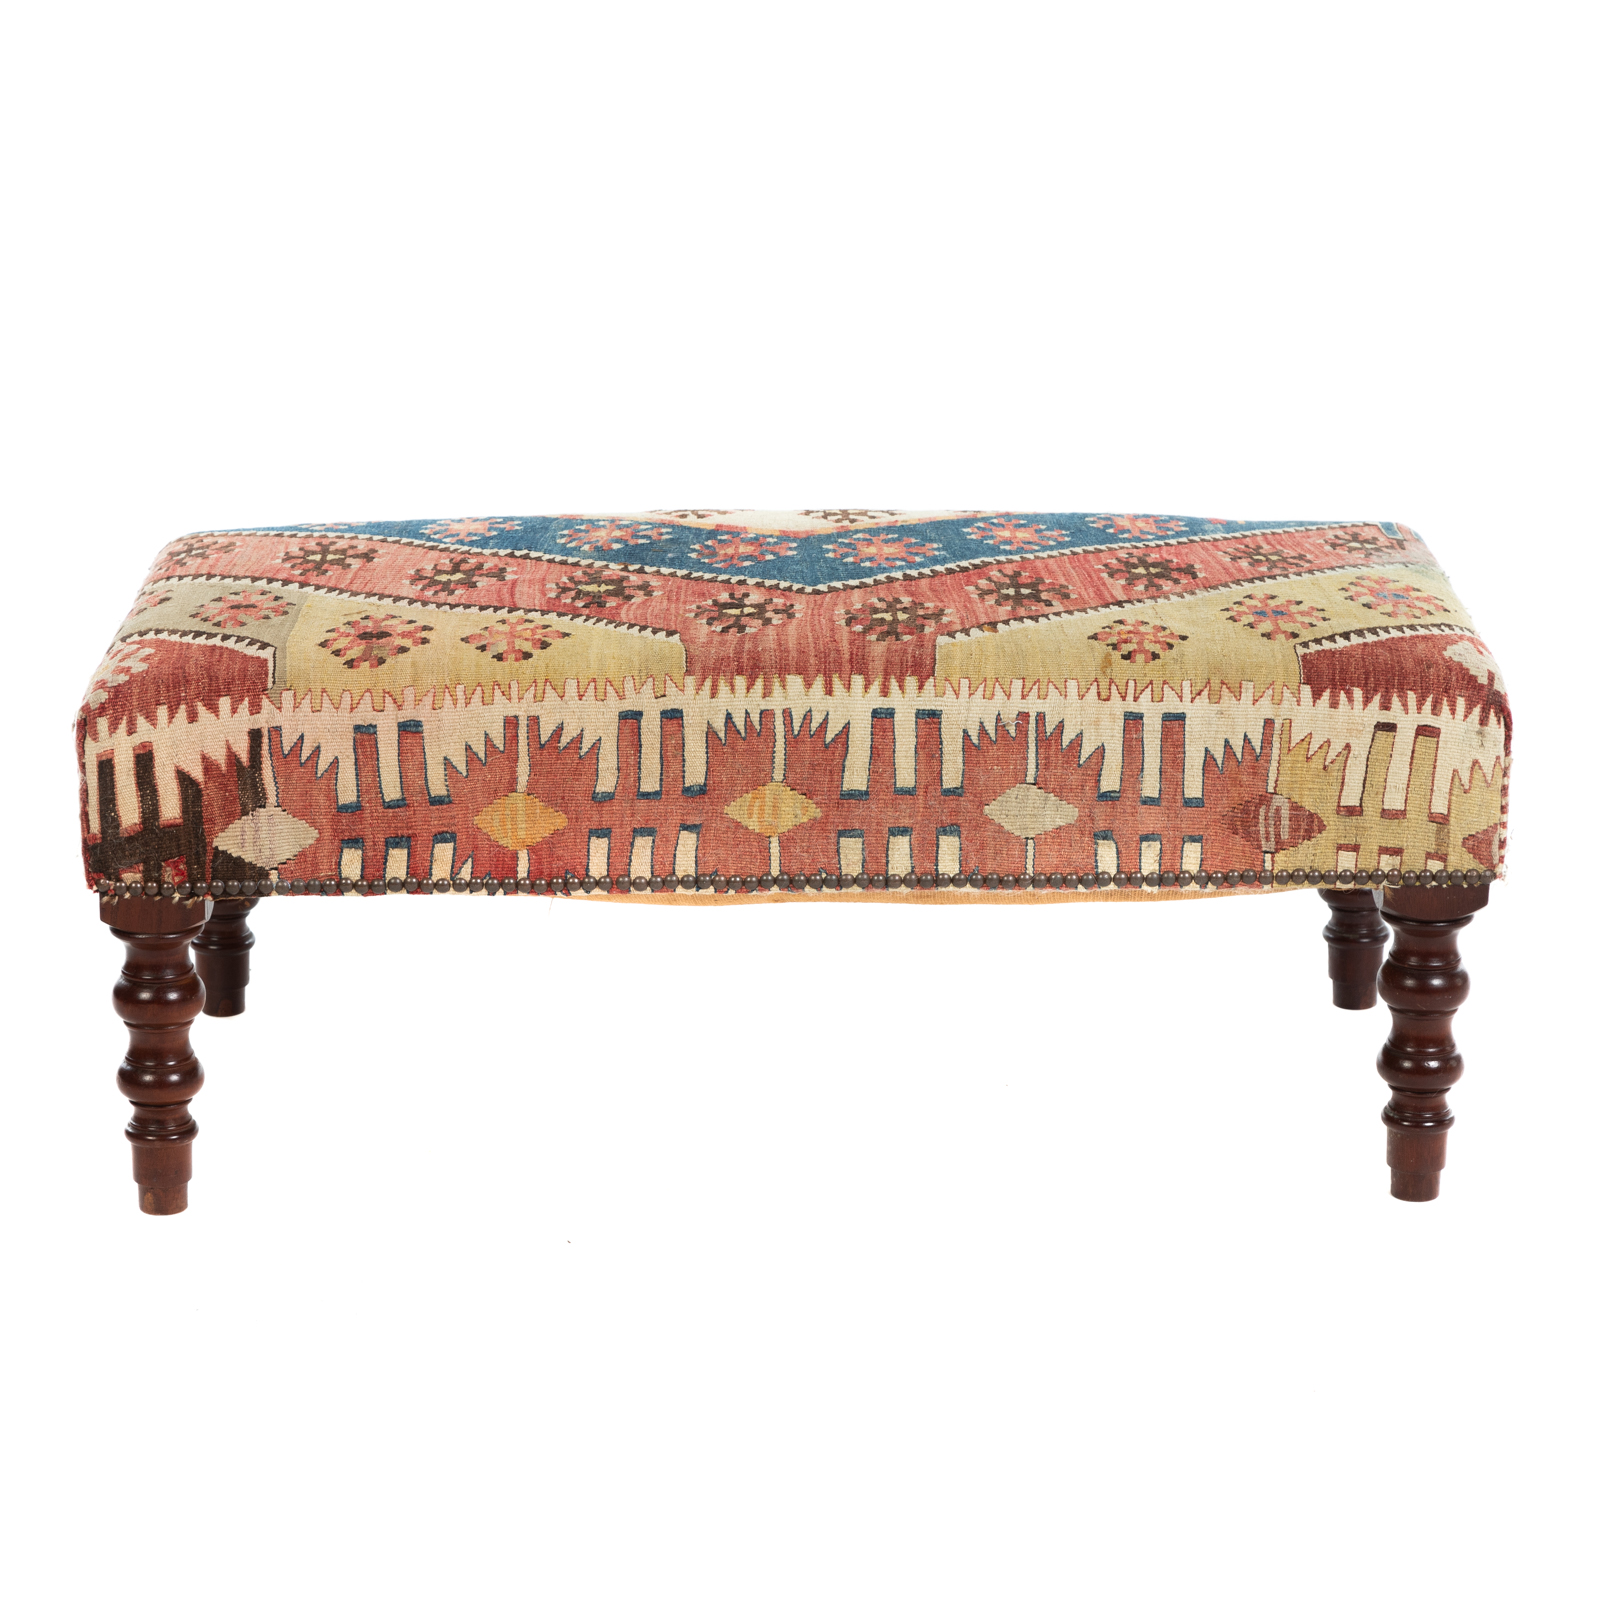 VICTORIAN KILIM UPHOLSTERED BENCH 36a9f3